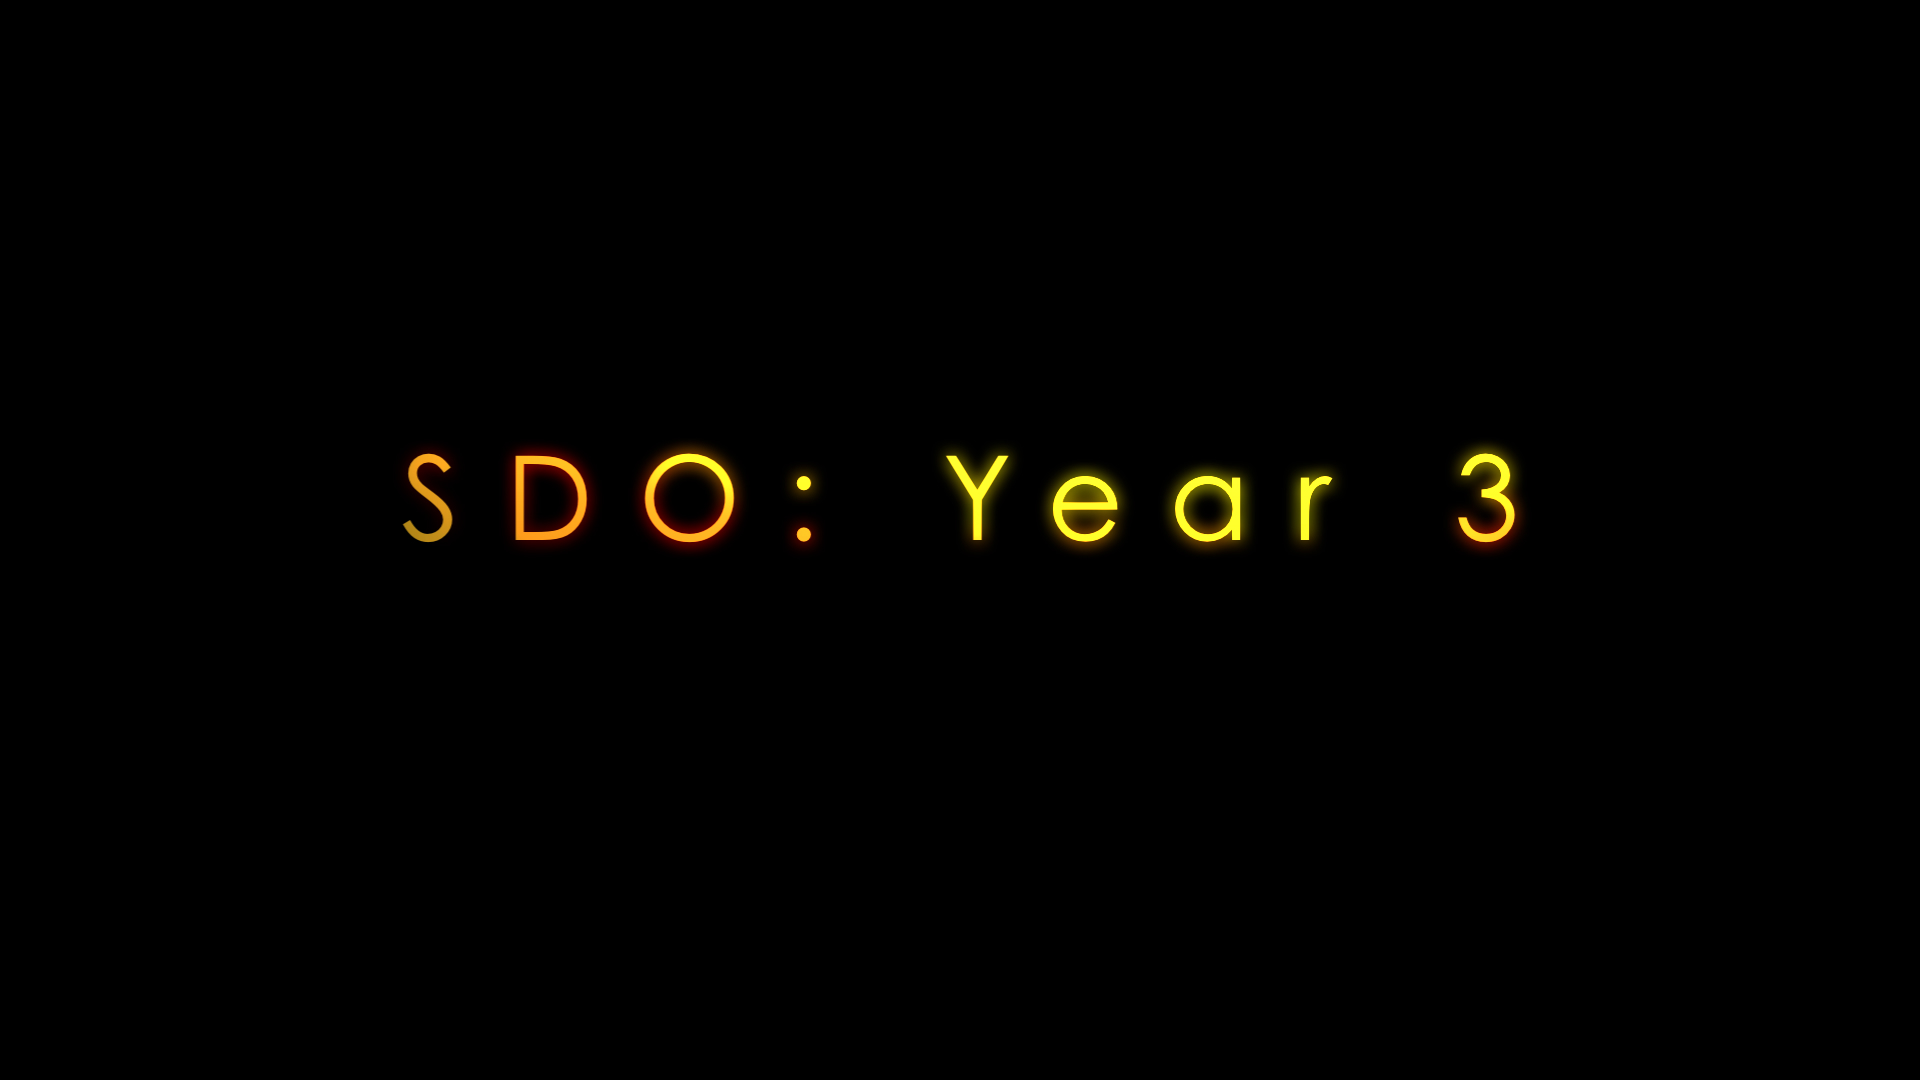 Preview Image for SDO: Year 3